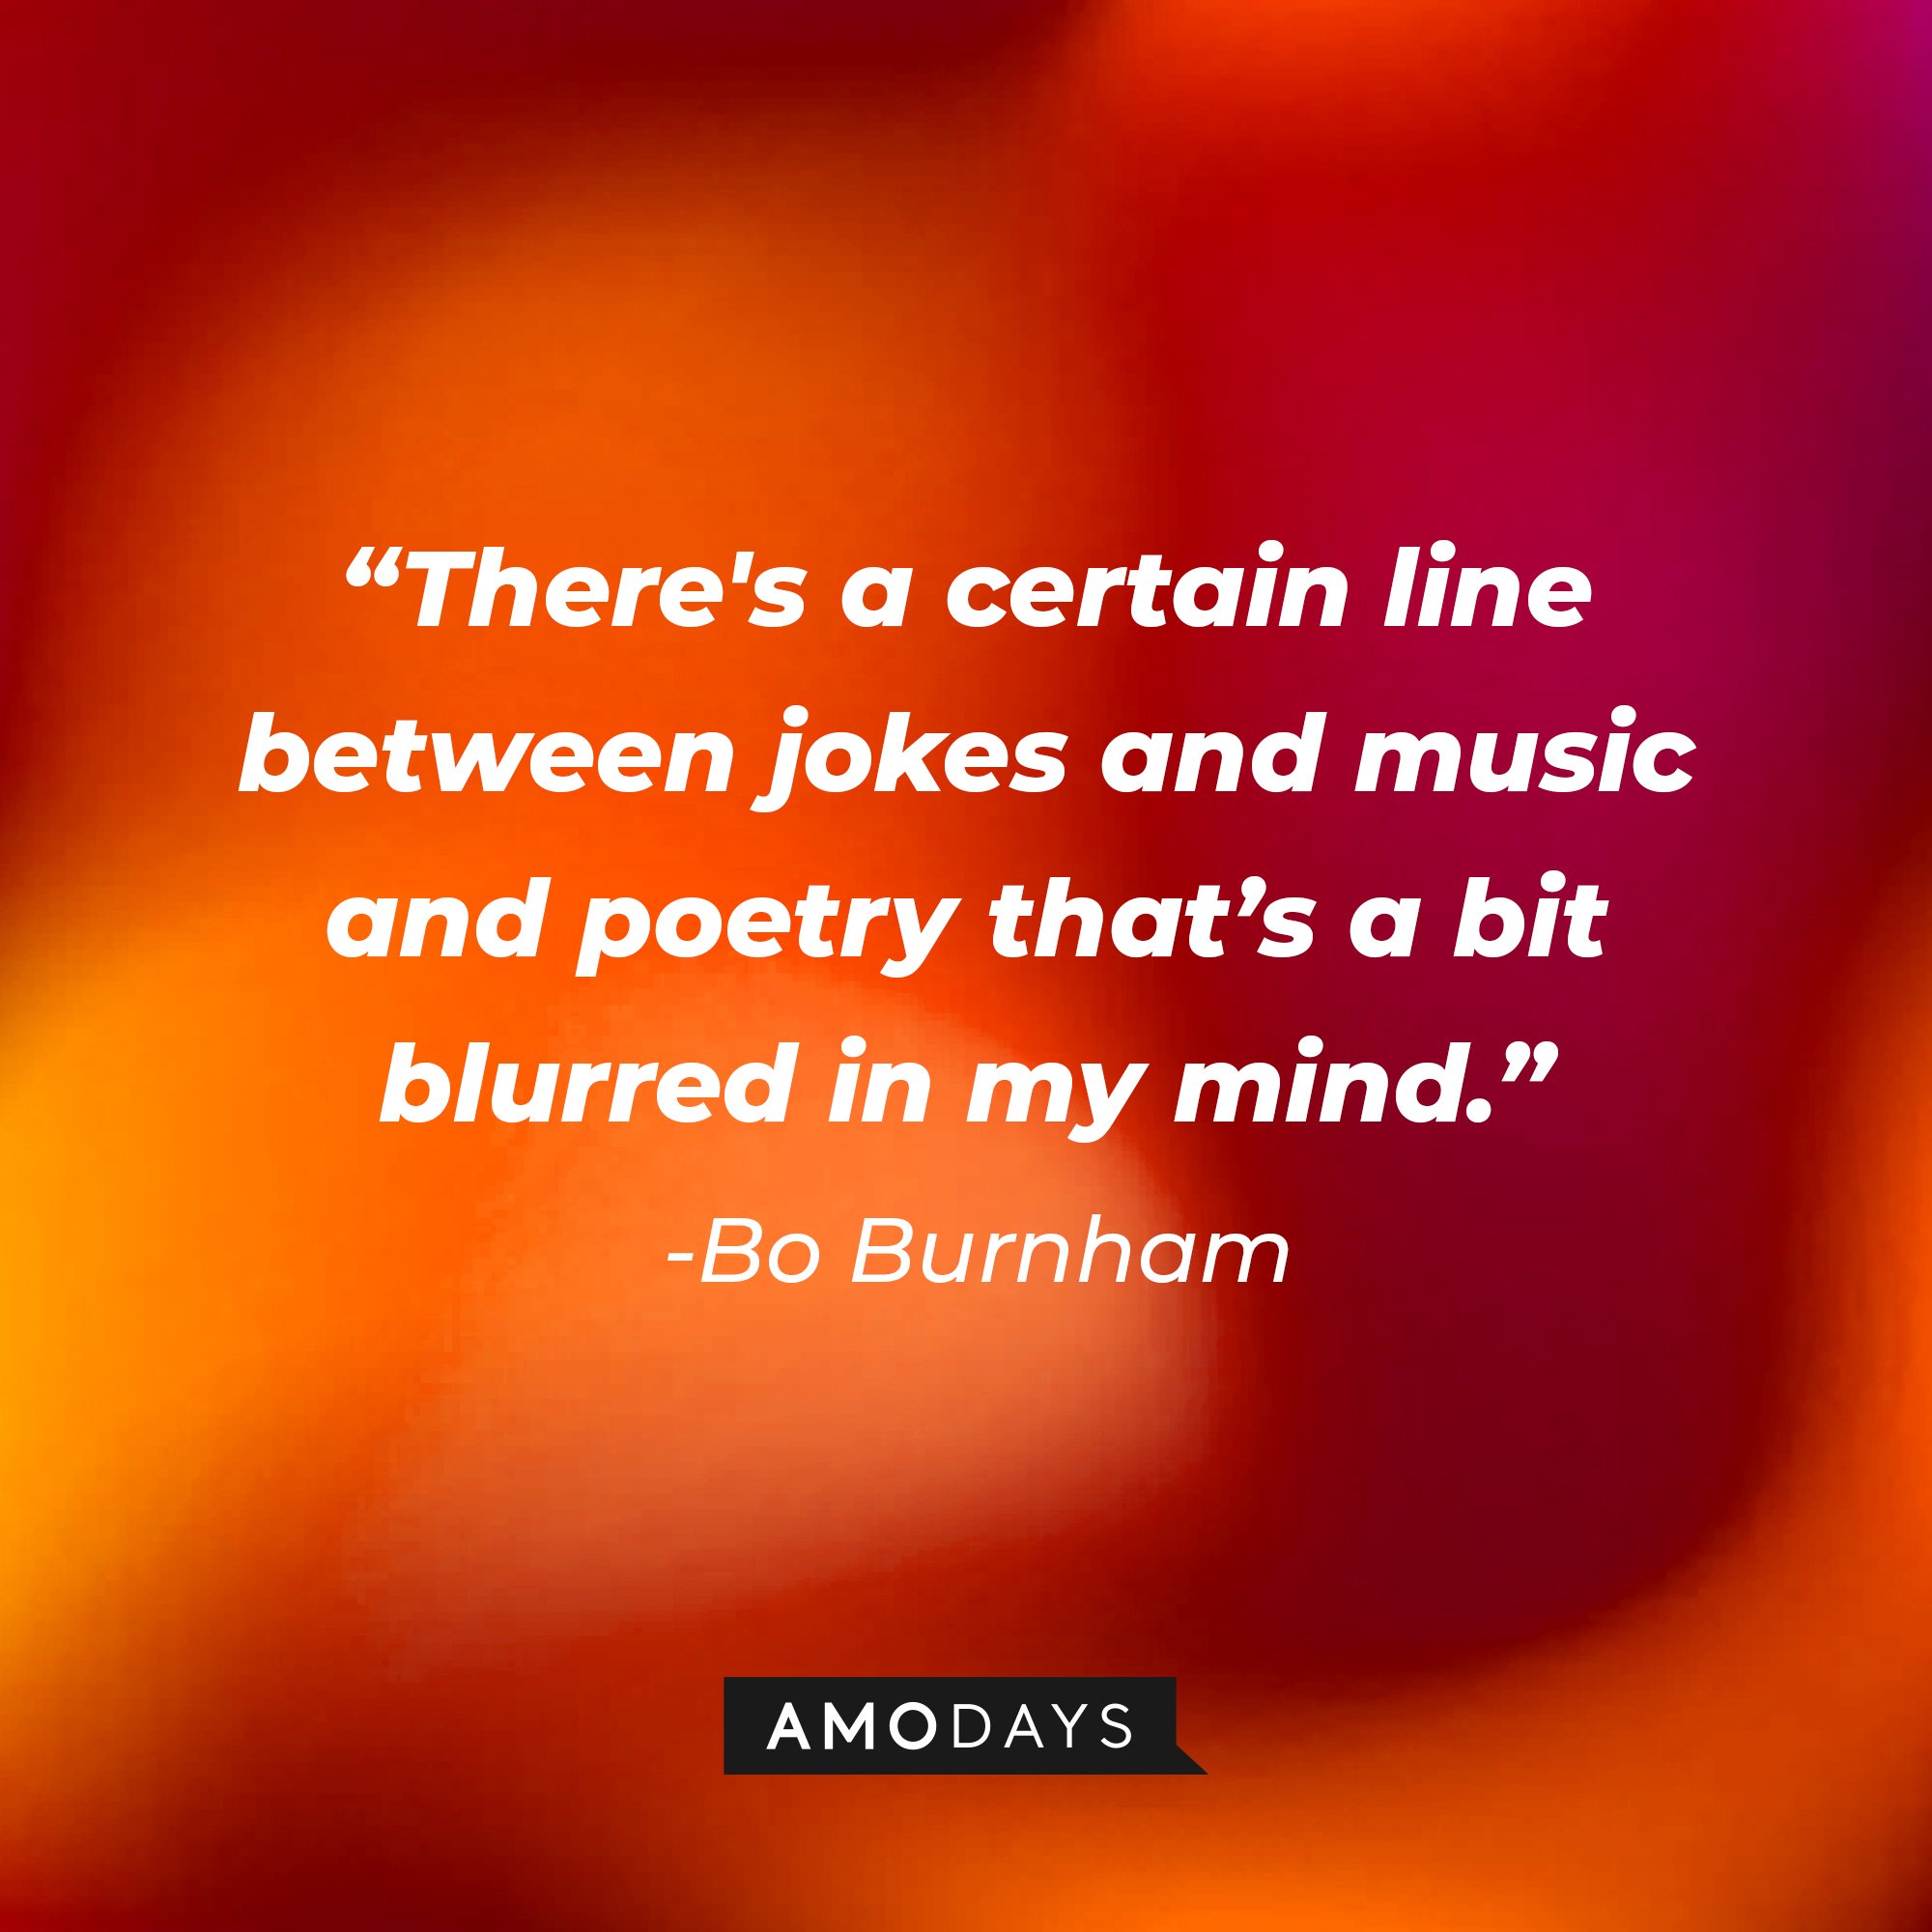 Bo Burnham’s quote: "There's a certain line between jokes and music and poetry that's a bit blurred in my mind." | Image: AmoDays